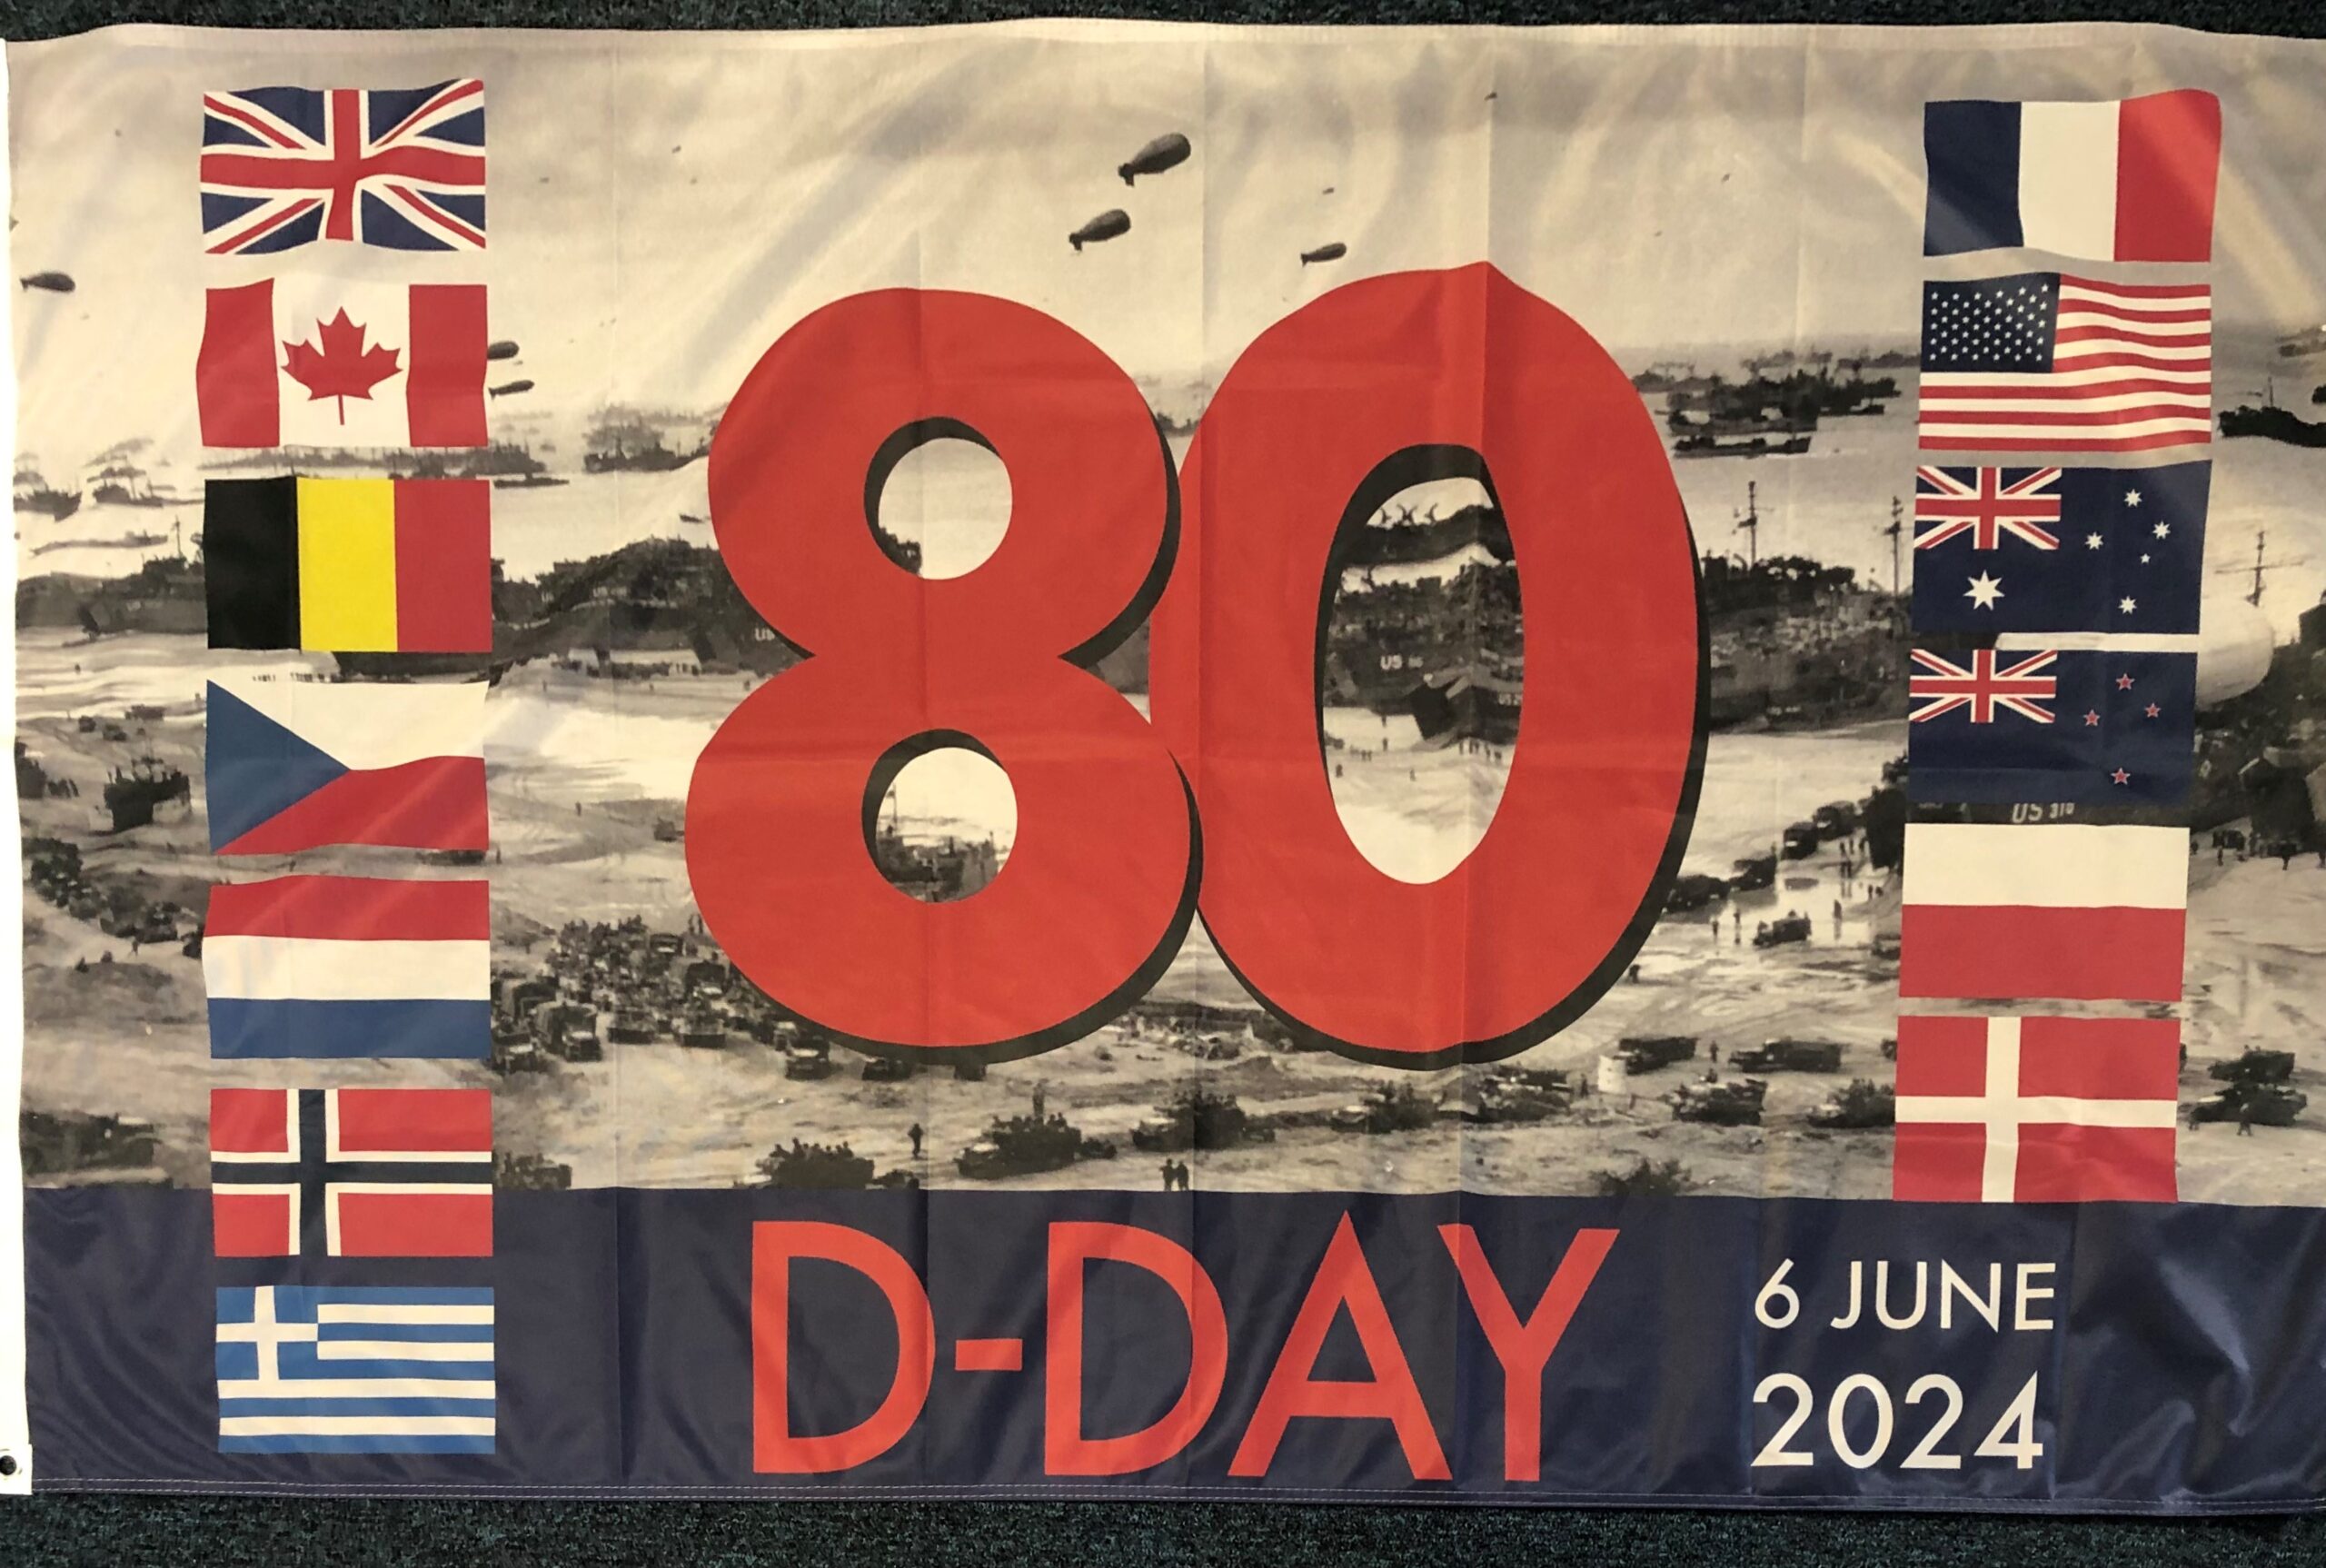 80th anniversary of DDay to be celebrated in style in Weymouth